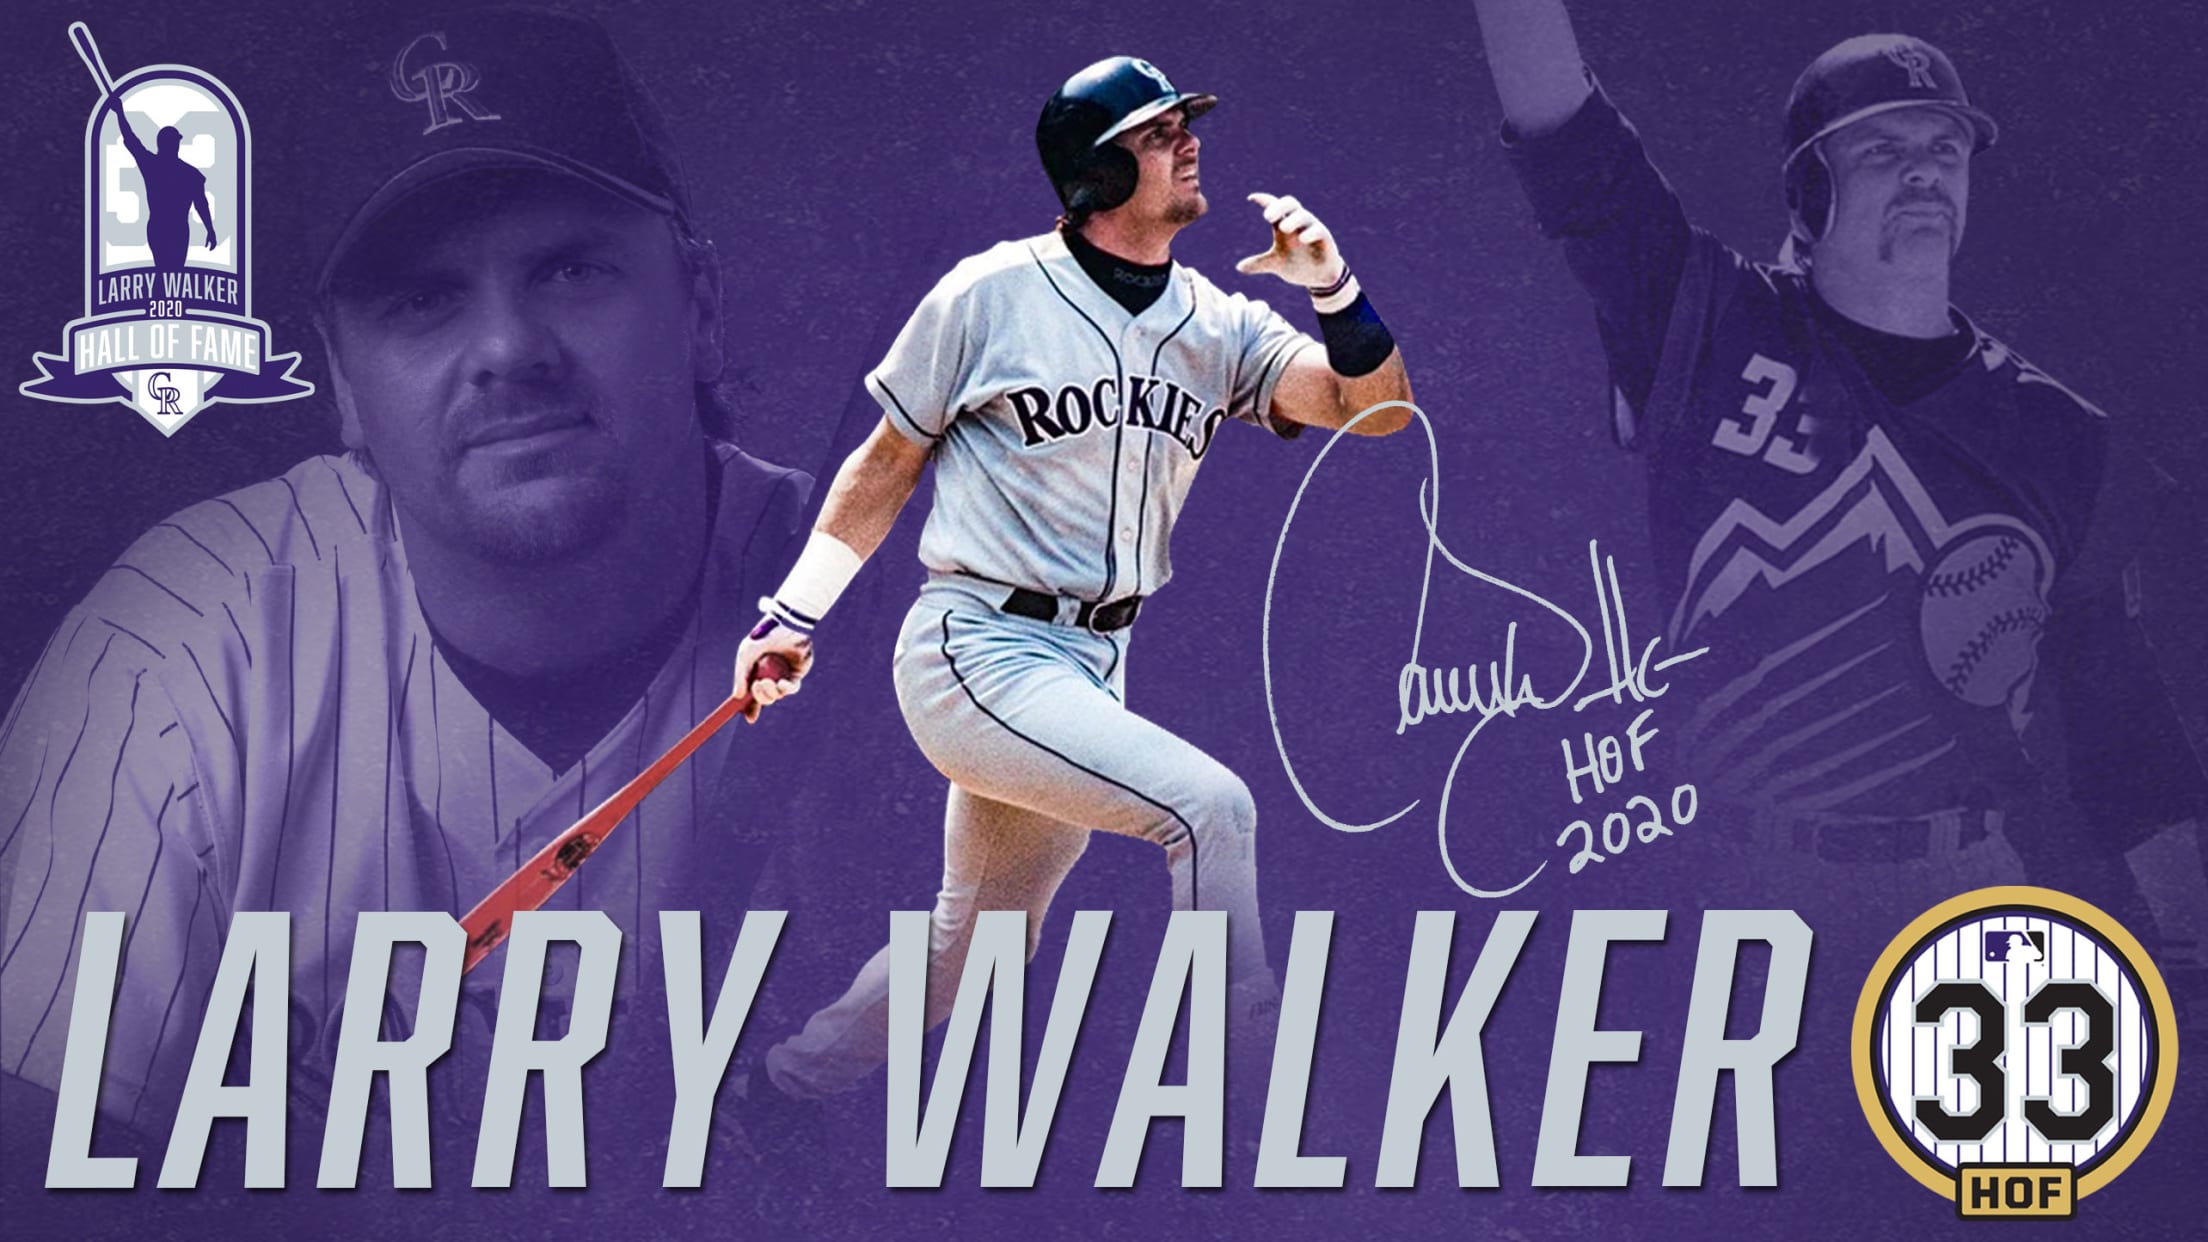 LARRY WALKER ROCKIES GAME USED JERSEY HALL OF FAME PLAYER